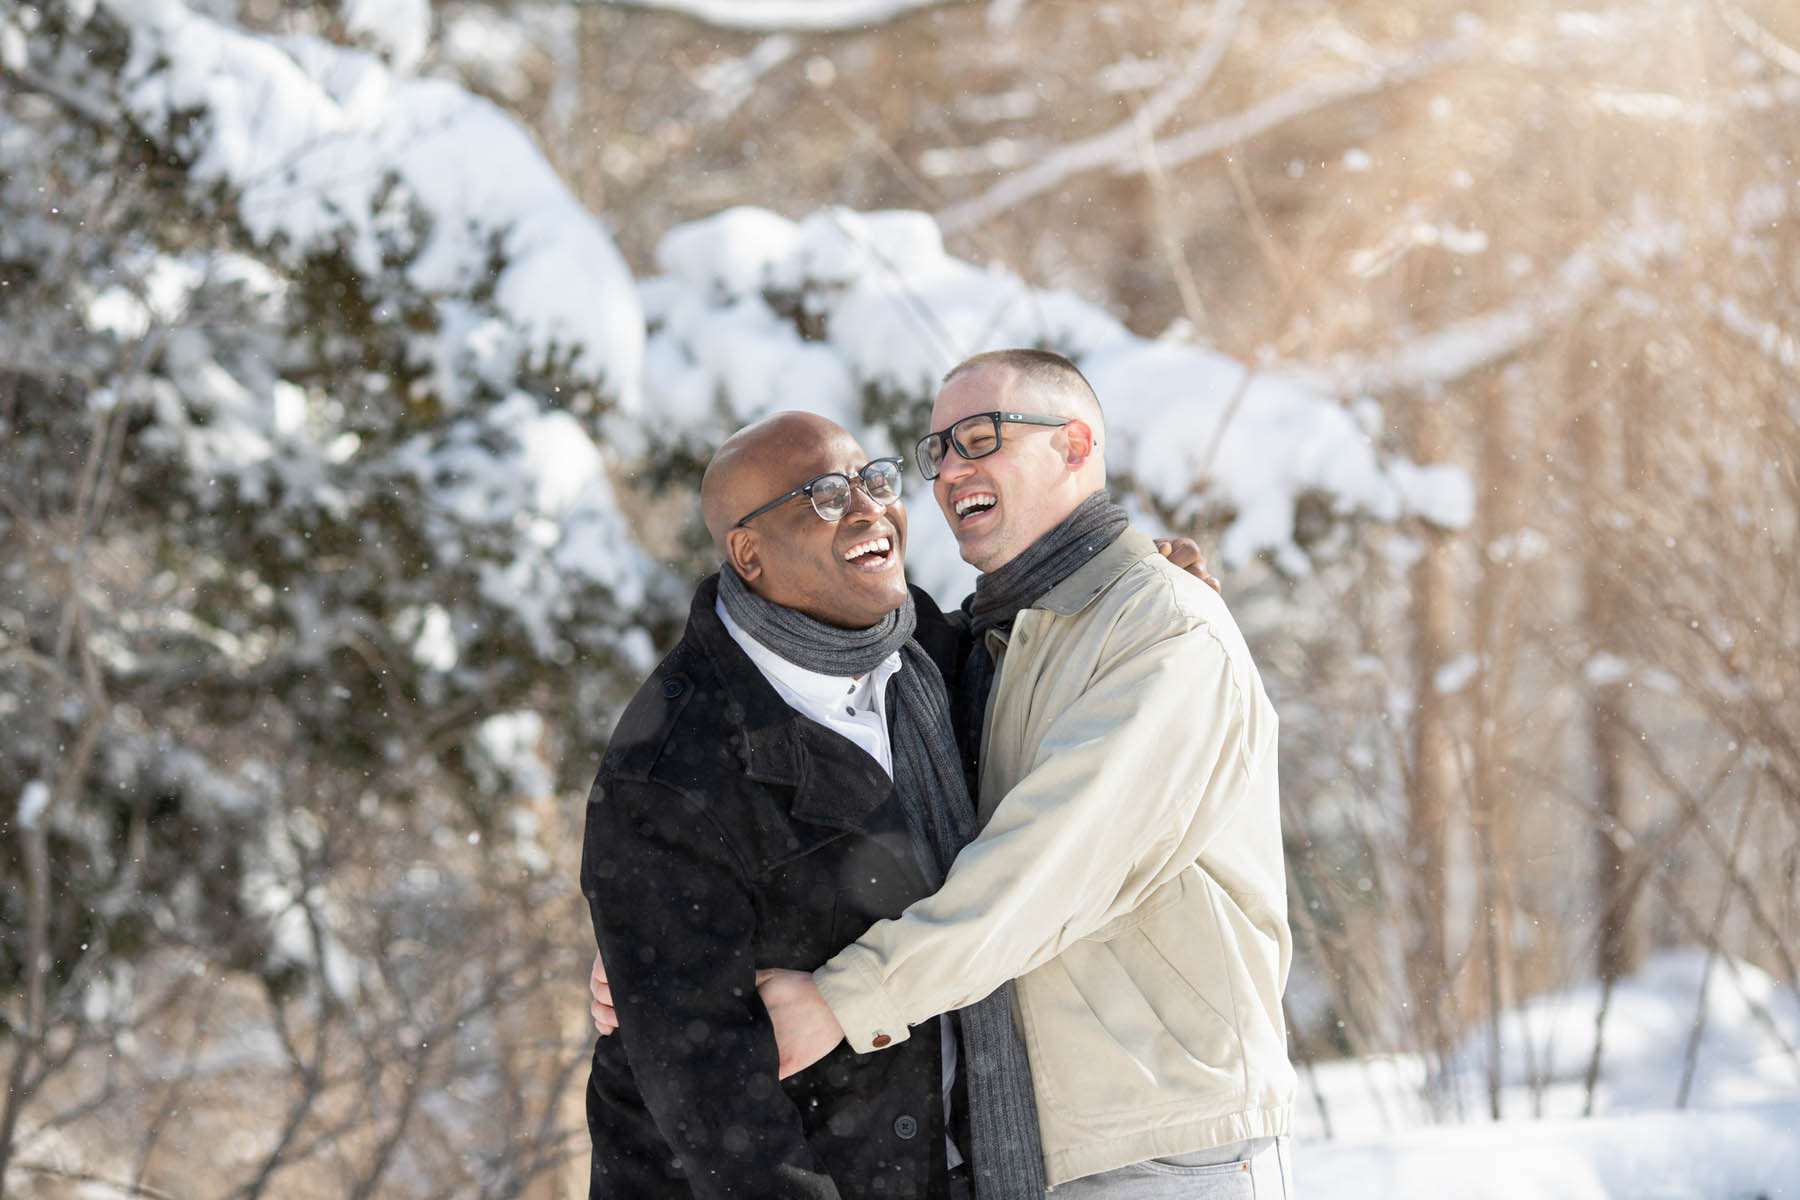 A black man and white man stand, embracing. They are both laughing as snow falls in front of them.